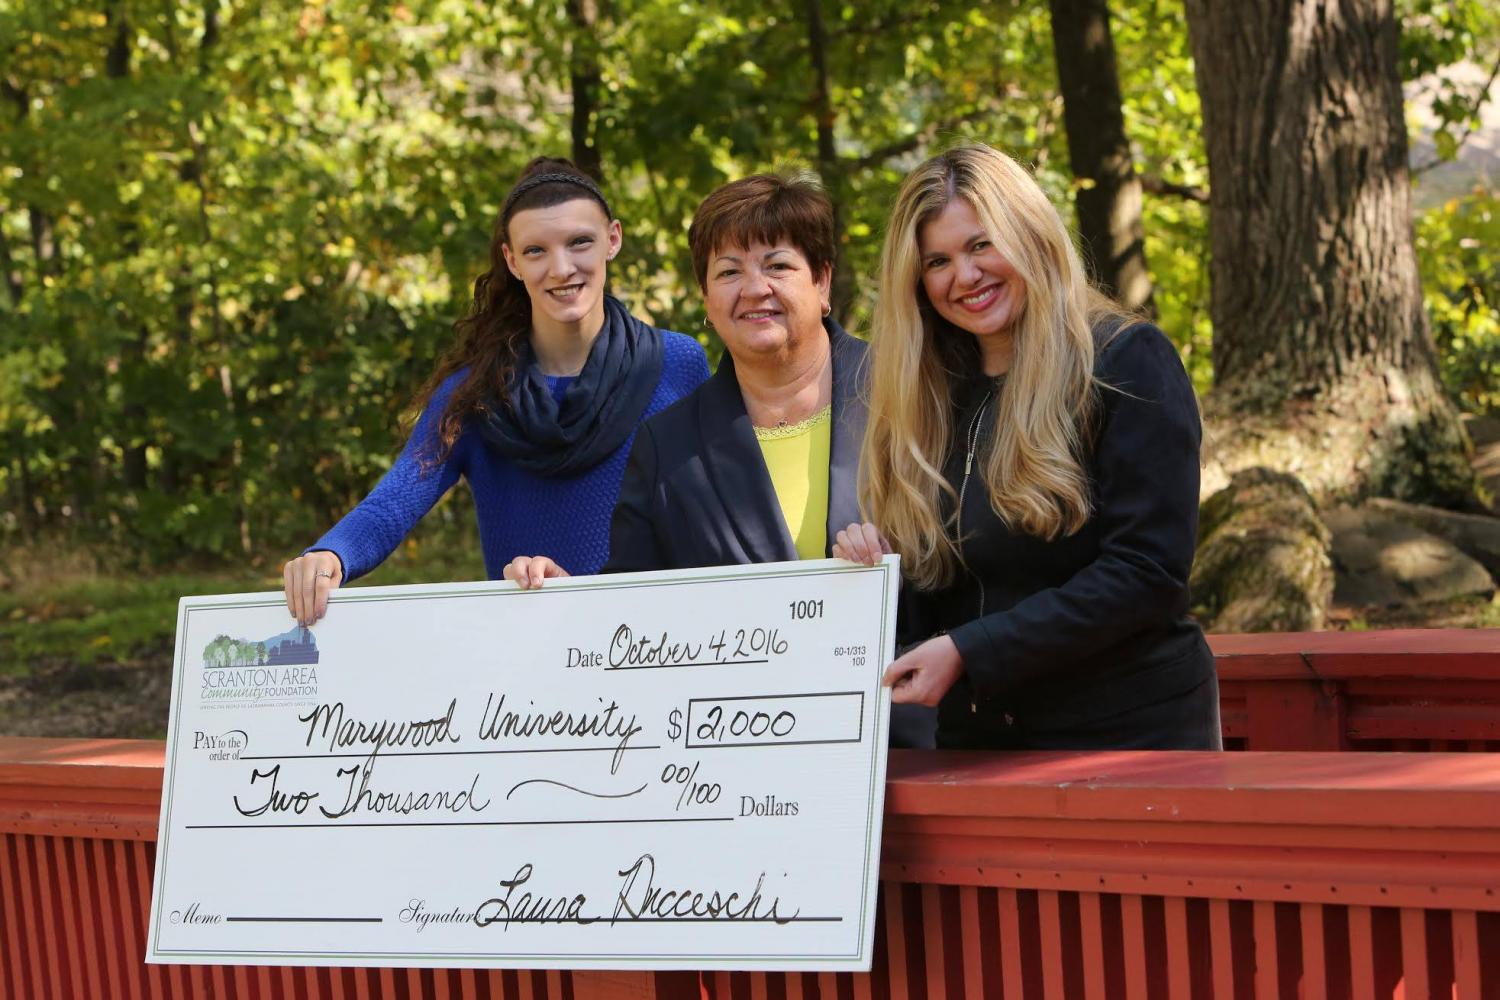 (Pictured left to right) Marissa Draim, Clarks Summit, violin music education major and student teacher for Marywood University’s String Project; Cathy Fitzpatrick, grants administrator at The Scranton Area Foundation; and Laura Ducceschi, president and CEO at The Scranton Area Foundation.